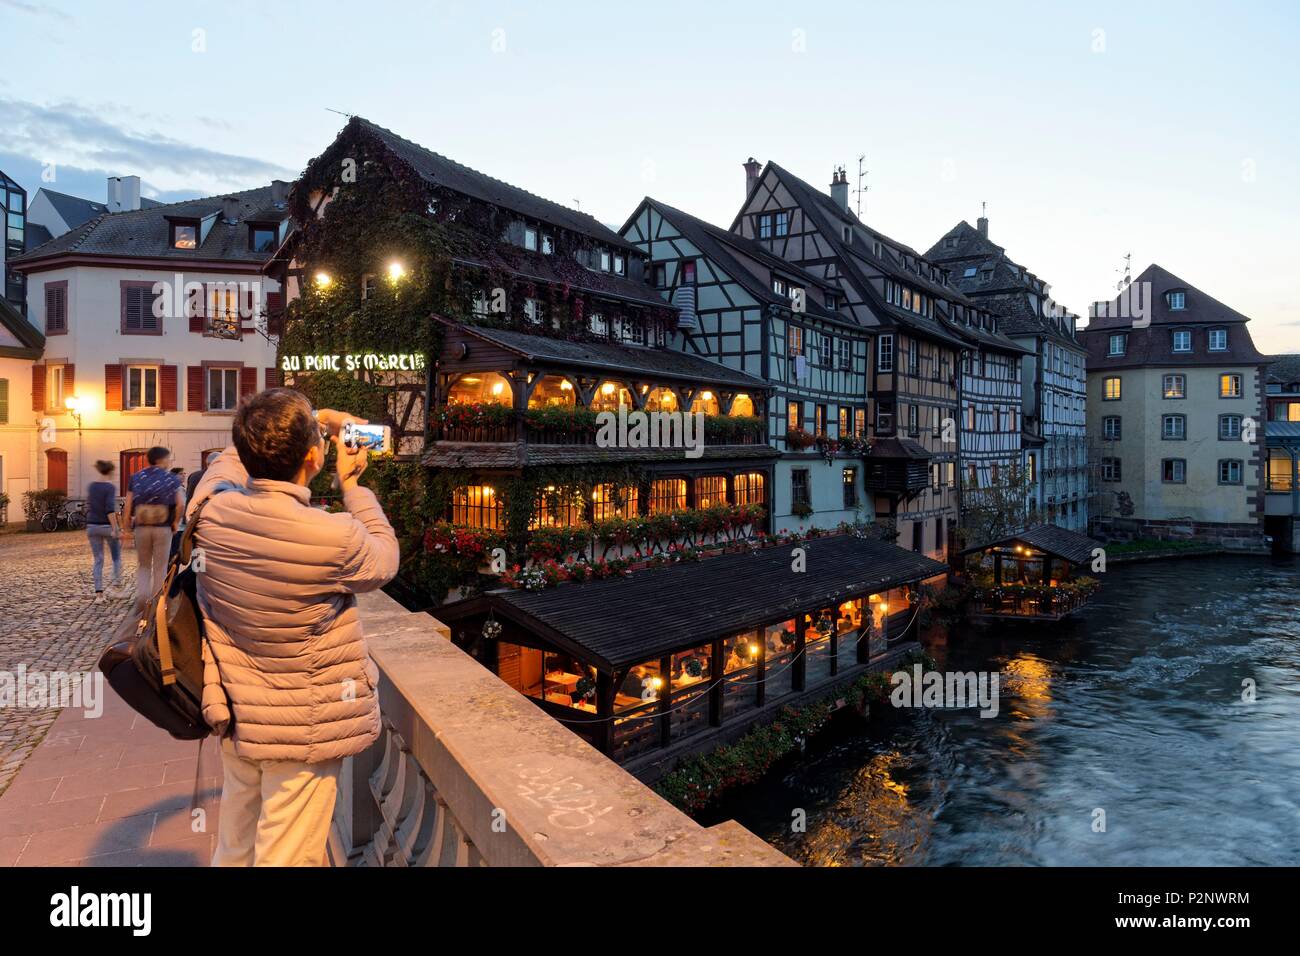 France, Bas Rhin, Strasbourg, old town listed as World Heritage by UNESCO, the Petite France District with the Au Pont Saint Martin restaurant Stock Photo